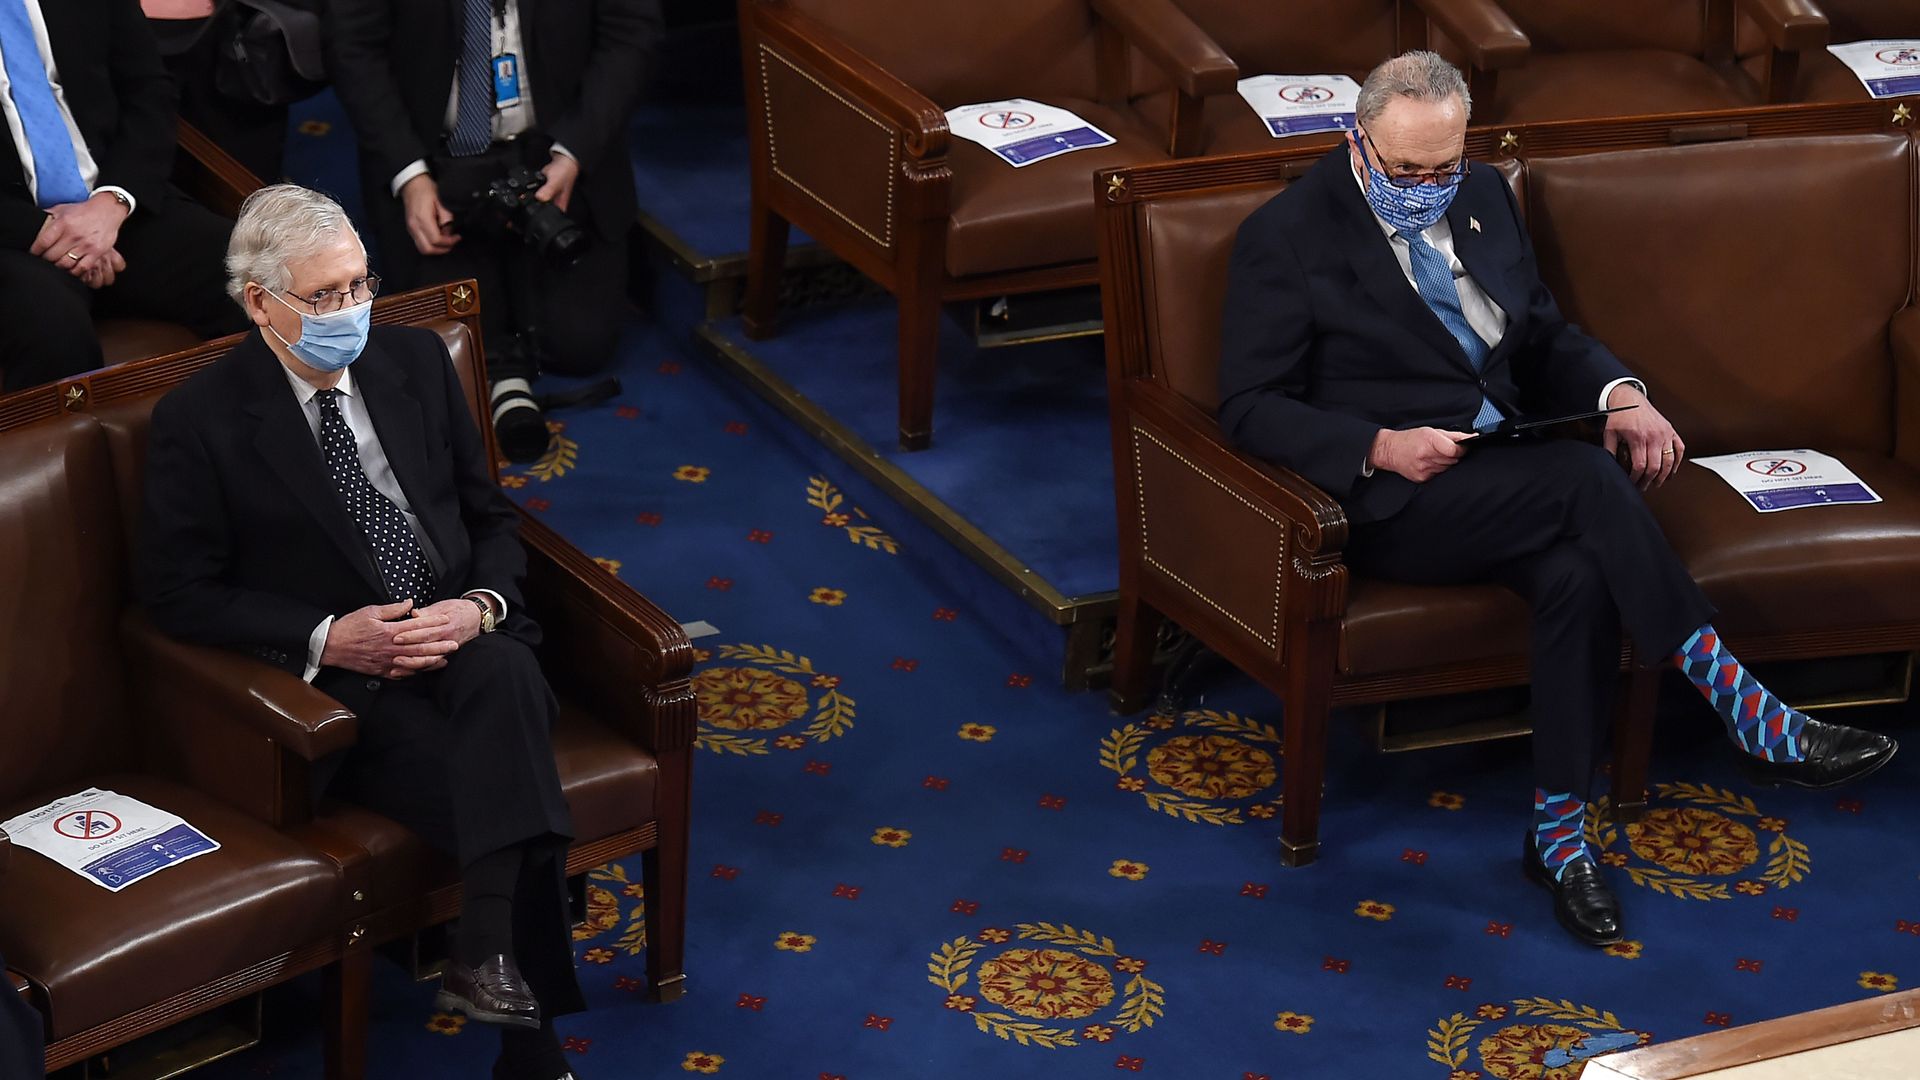 US Senate Minority Leader Charles Schumer (R), Democrat of New York, right, and Majority Leader Mitch McConnell, Republican of Kentucky, attend a joint session of Congress